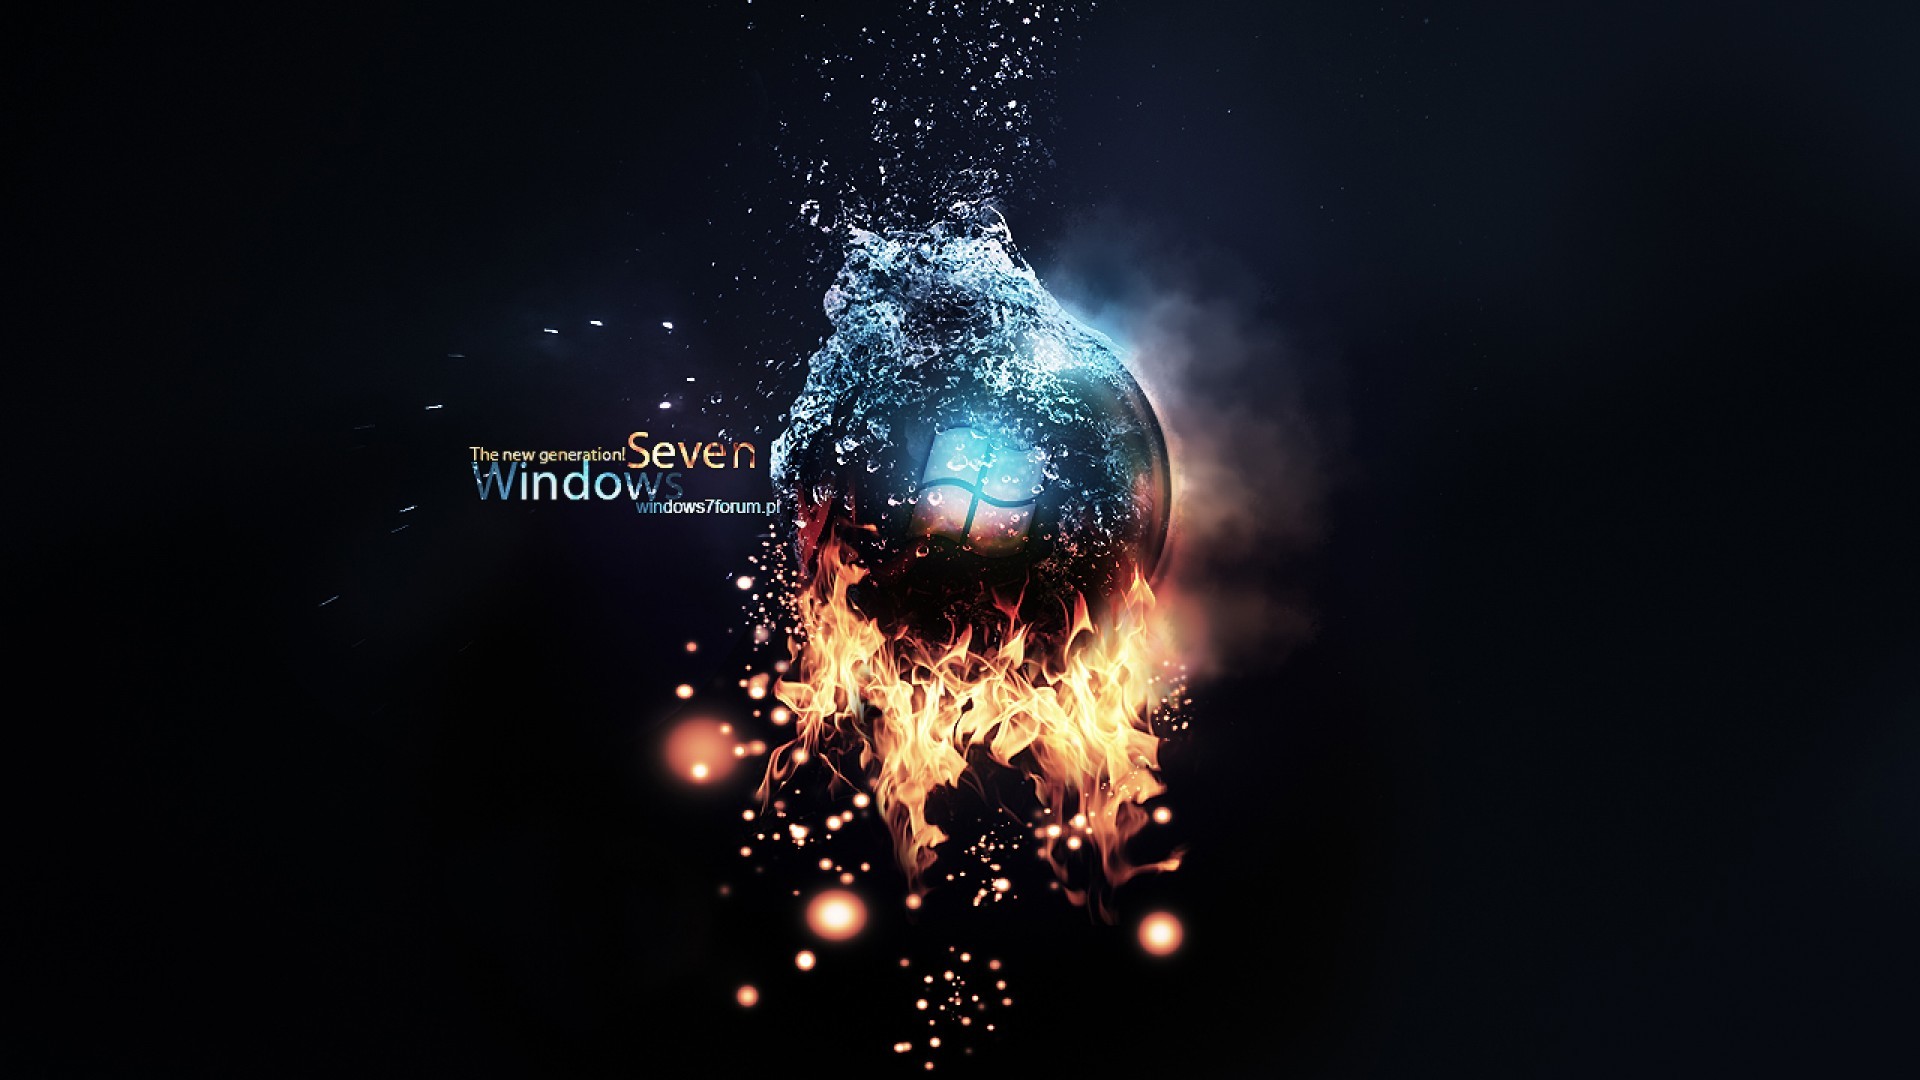 Windows 7 Ultimate Wallpapers HD (61+ images)